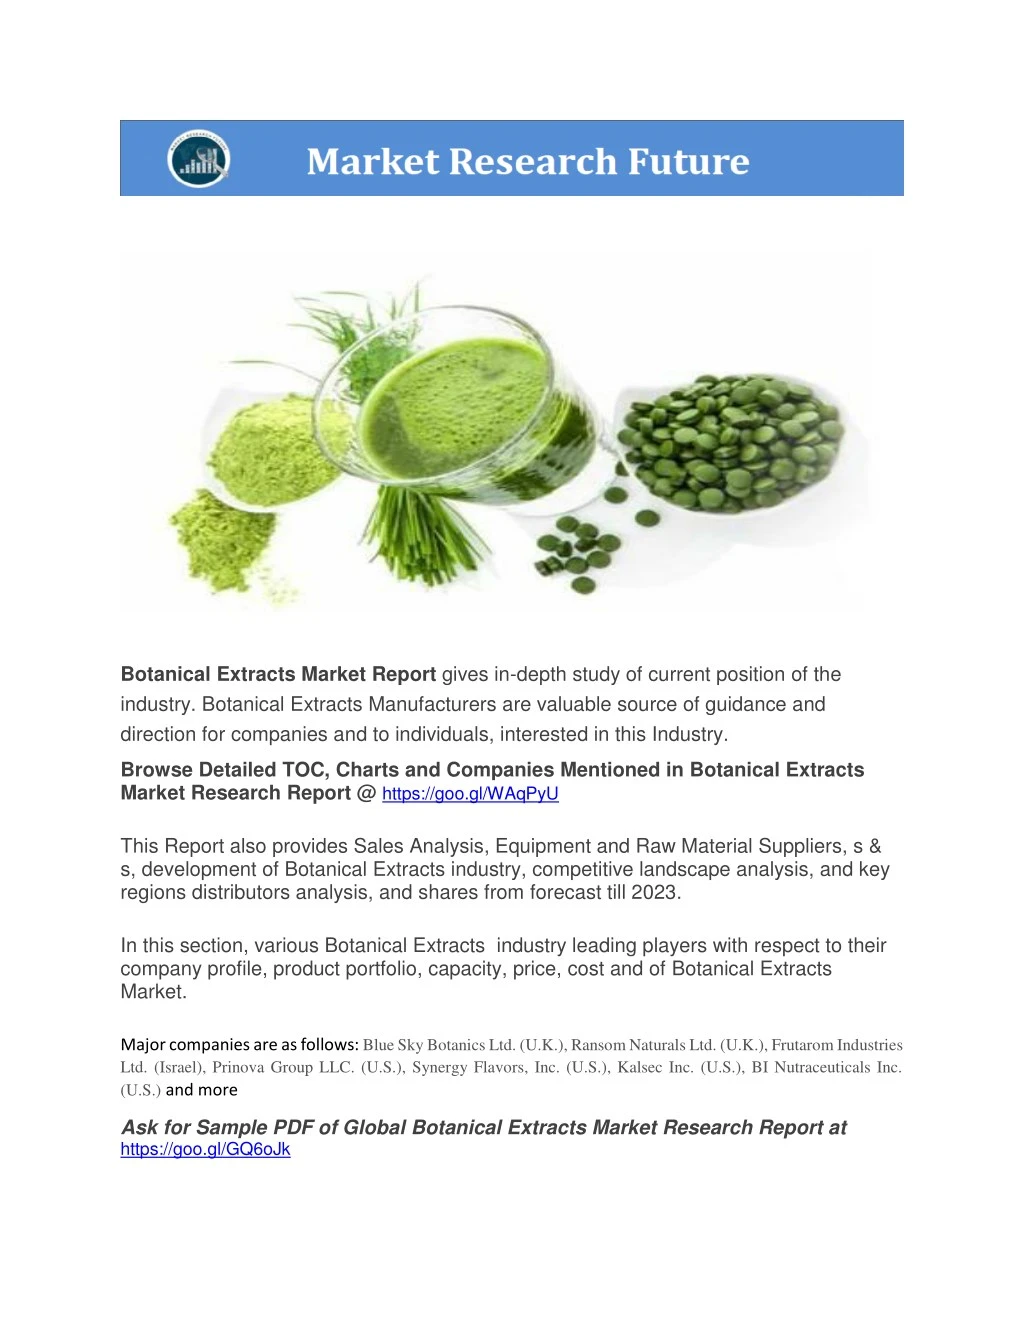 botanical extracts market report gives in depth